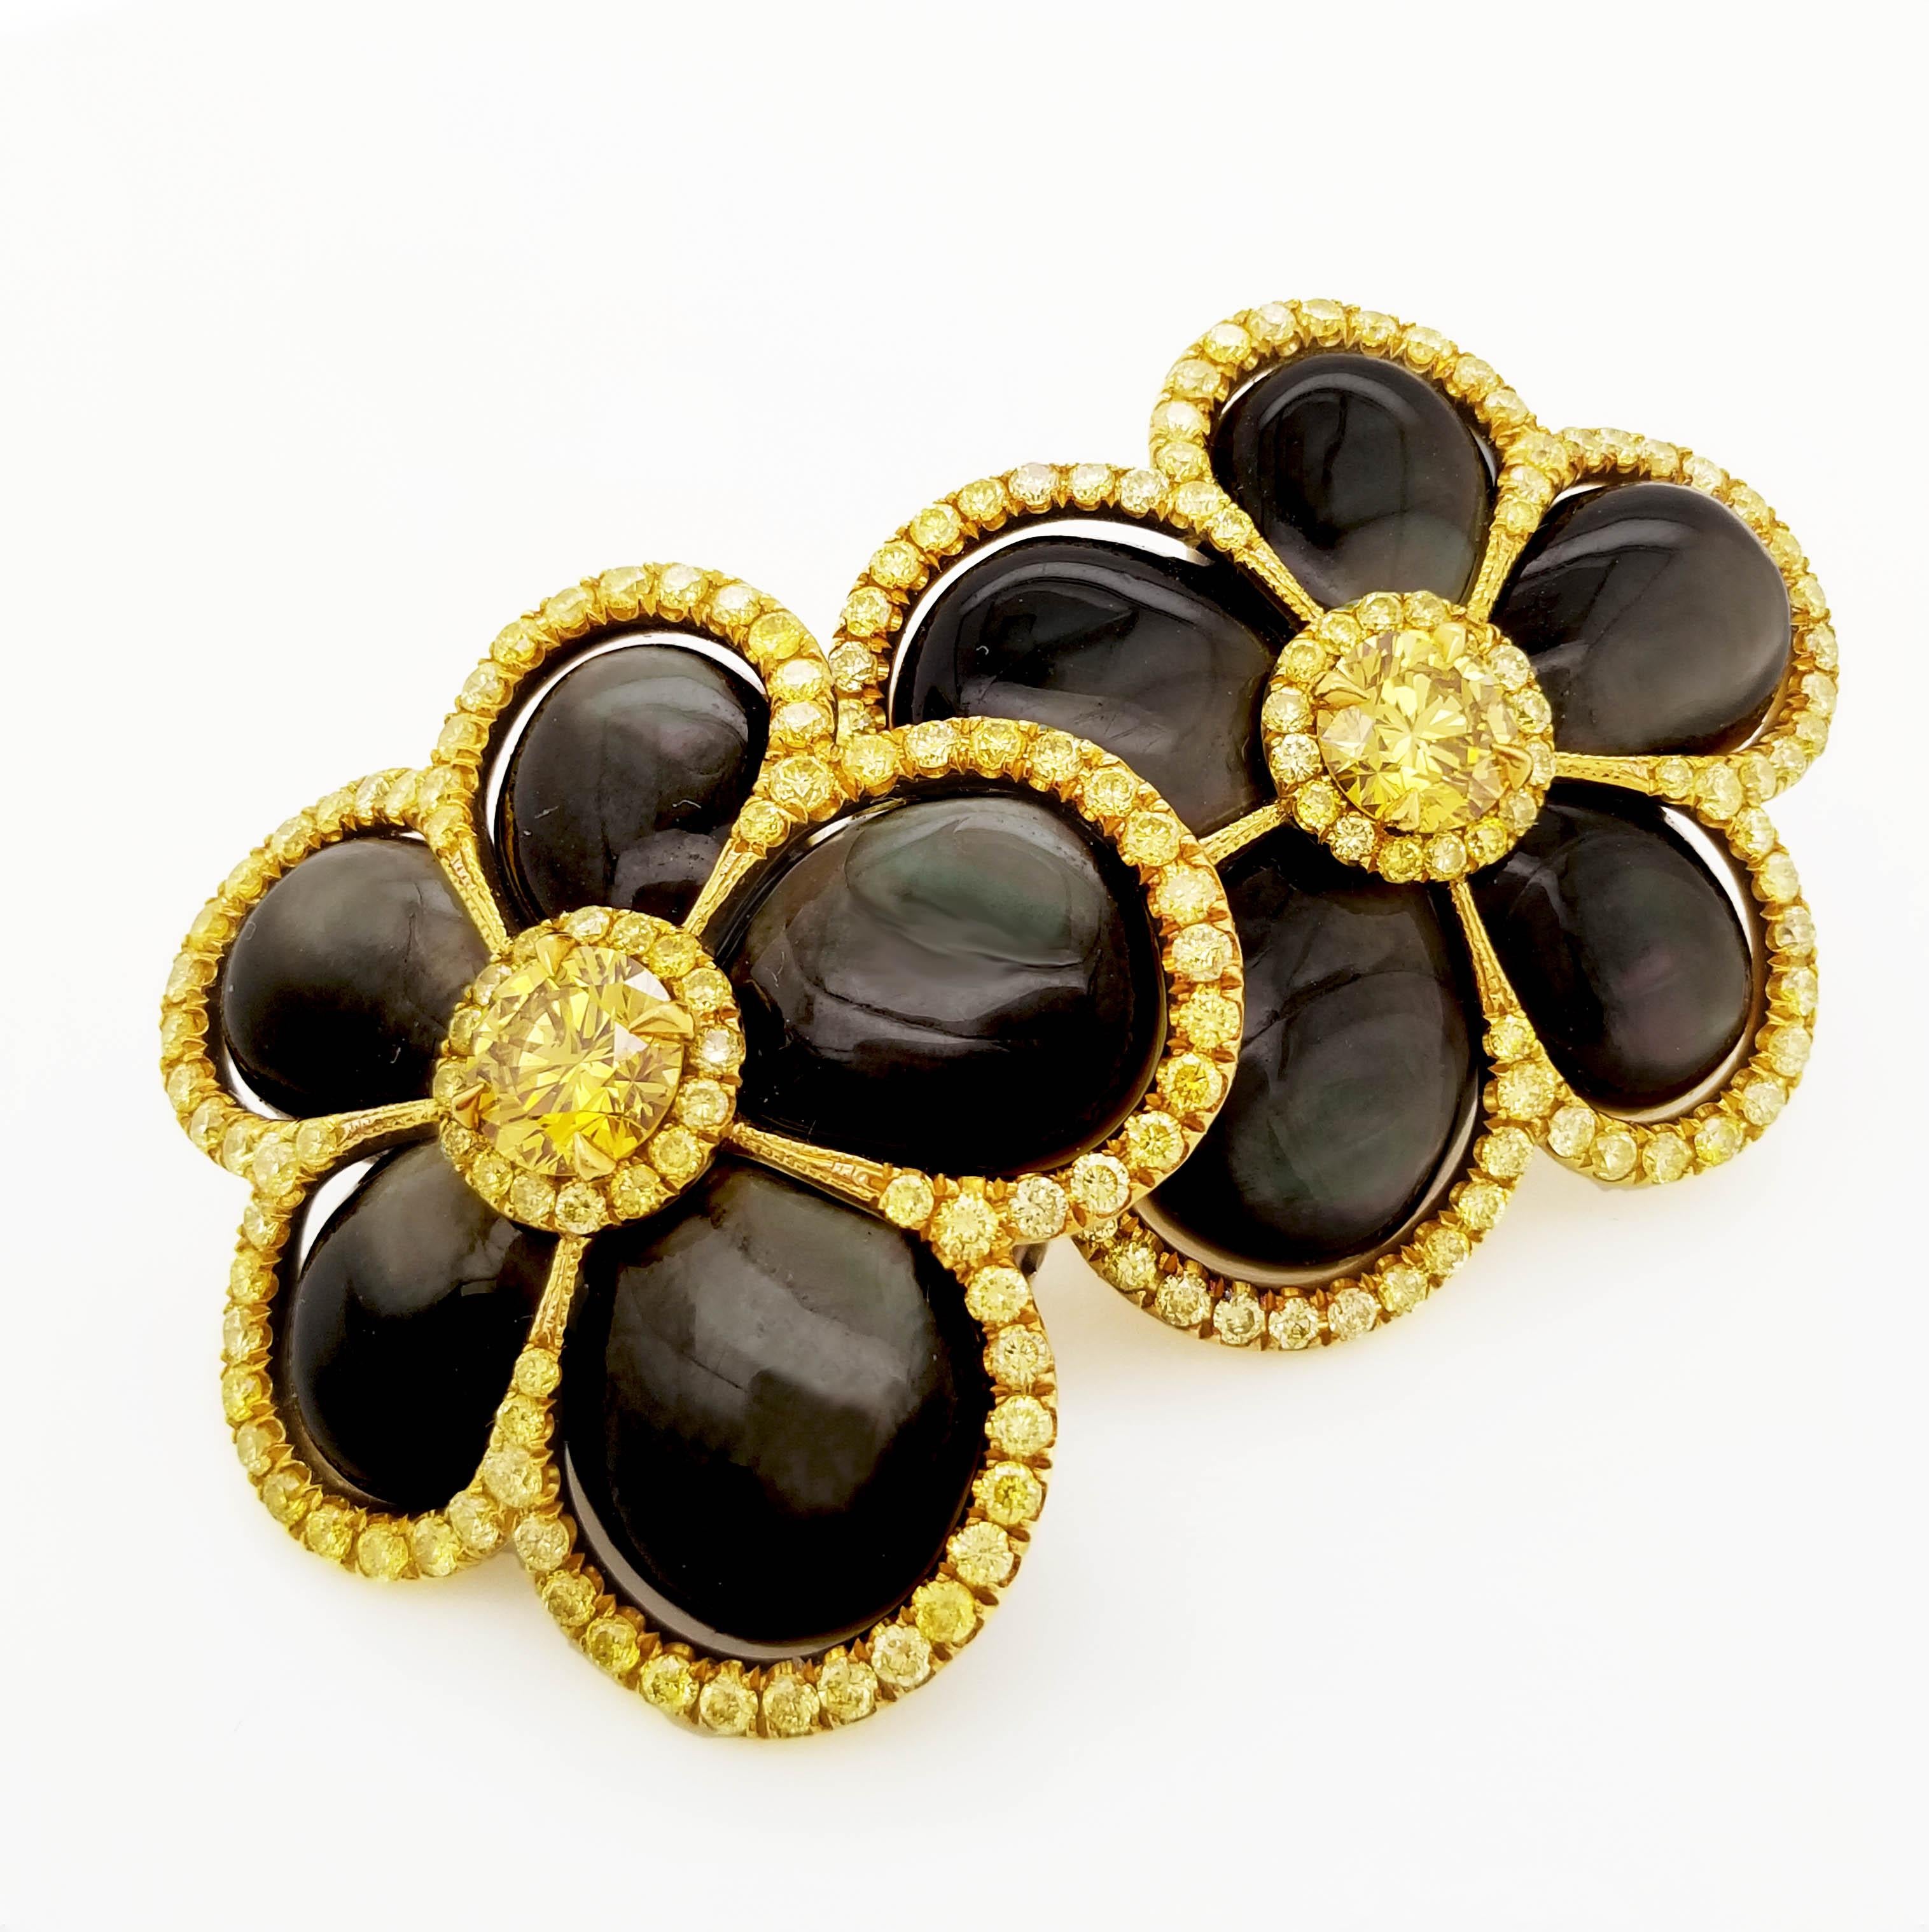 From Scarselli Couture Collection these astonishing wearable Earrings with Fancy Vivid Yellow Diamonds 0.40ct each approx. GIA certified (see certificates for detailed information of the stones) are blooming with Black Mother-of-Pearl petals